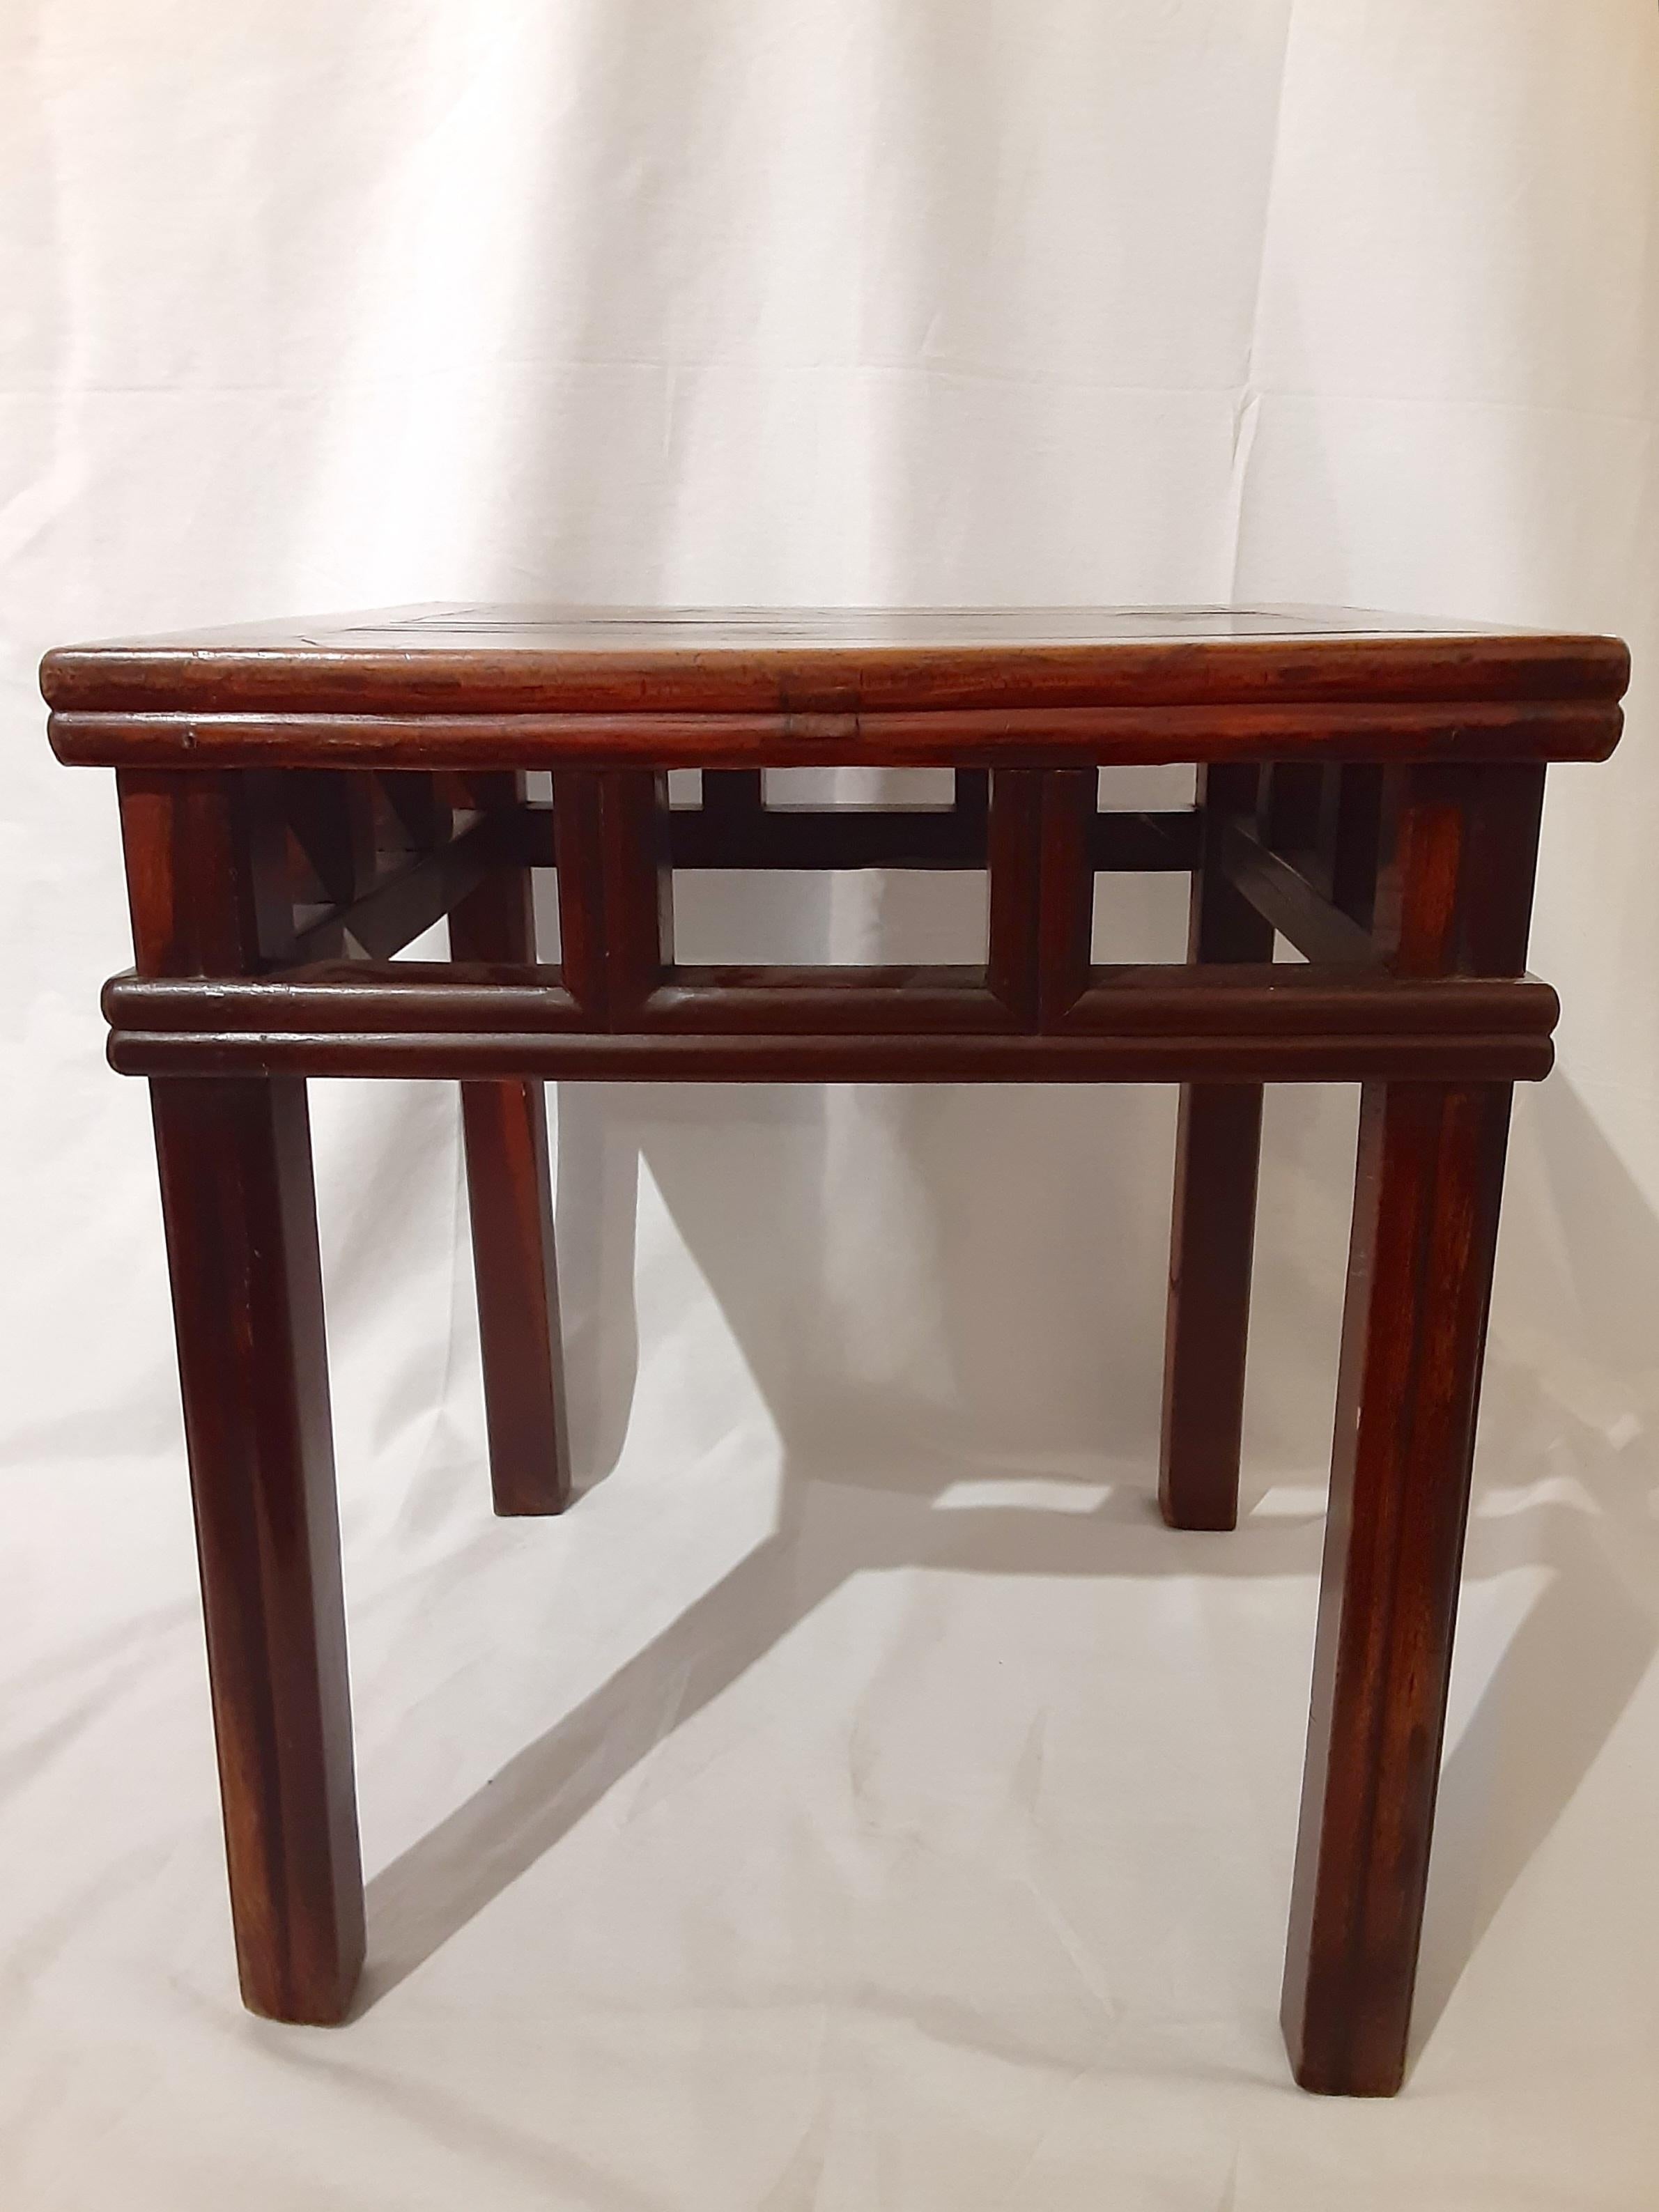 Chinese side table

Dimensions: 18